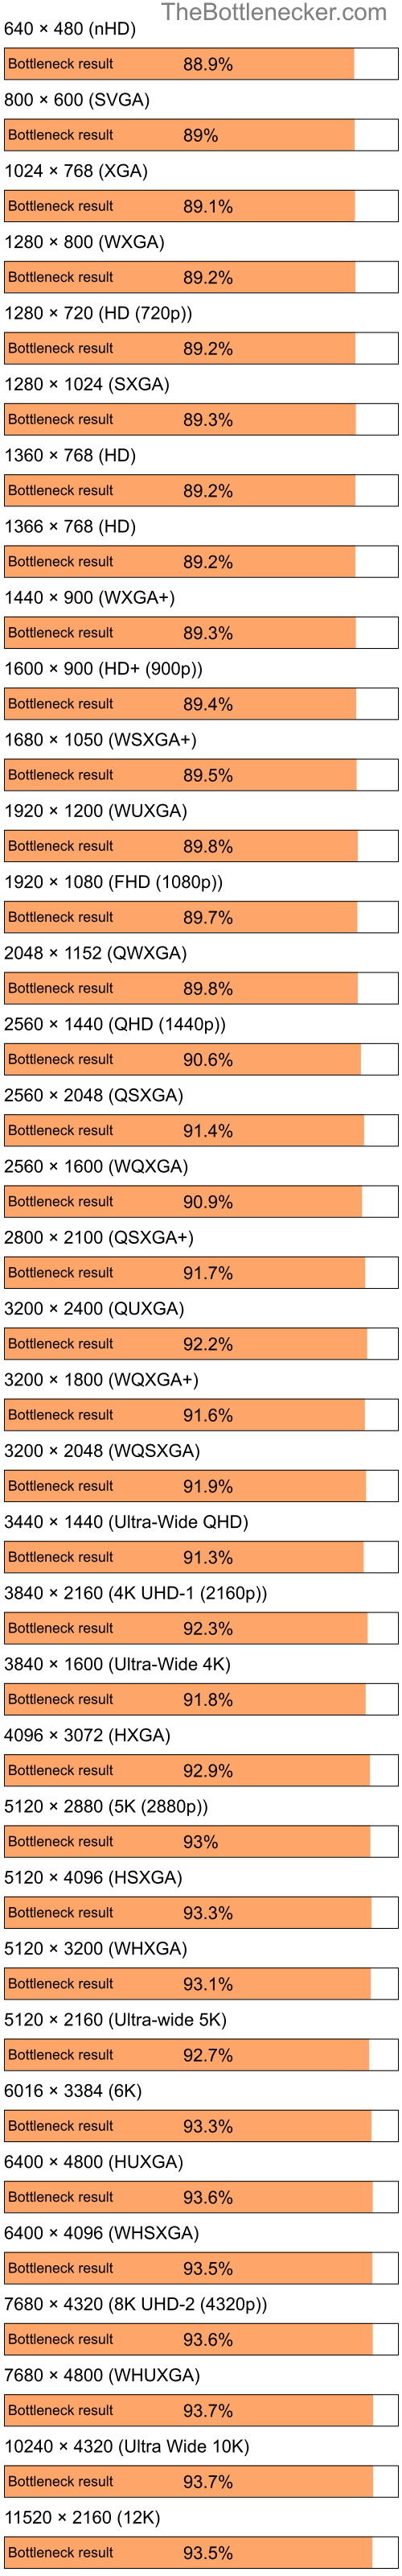 Bottleneck results by resolution for Intel Celeron M 420 and NVIDIA GeForce4 Ti 4600 in General Tasks